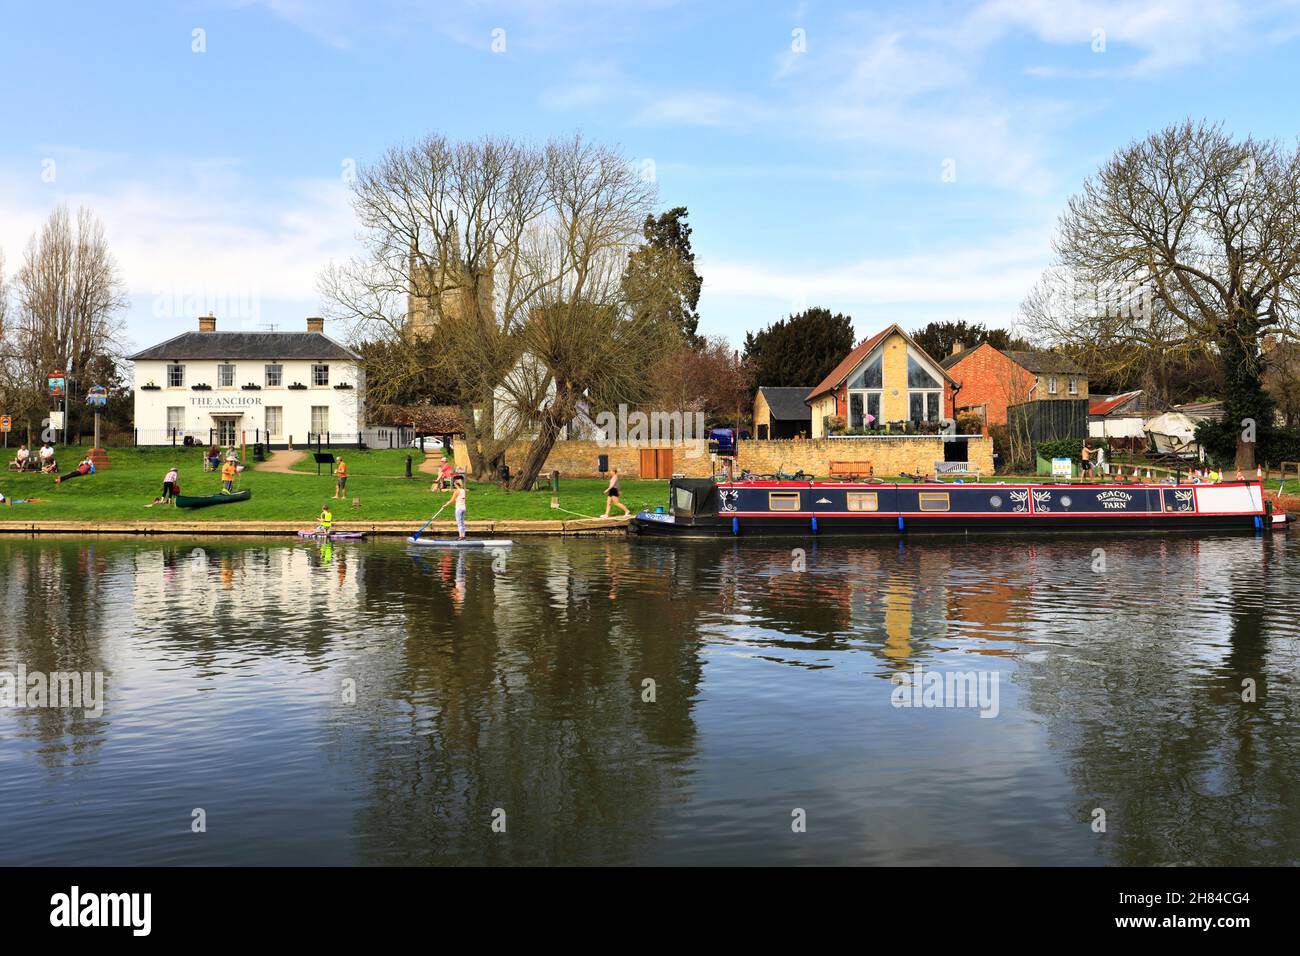 The Anchor pub, river Great Ouse, Great Barford village, Bedfordshire, England, UK Stock Photo